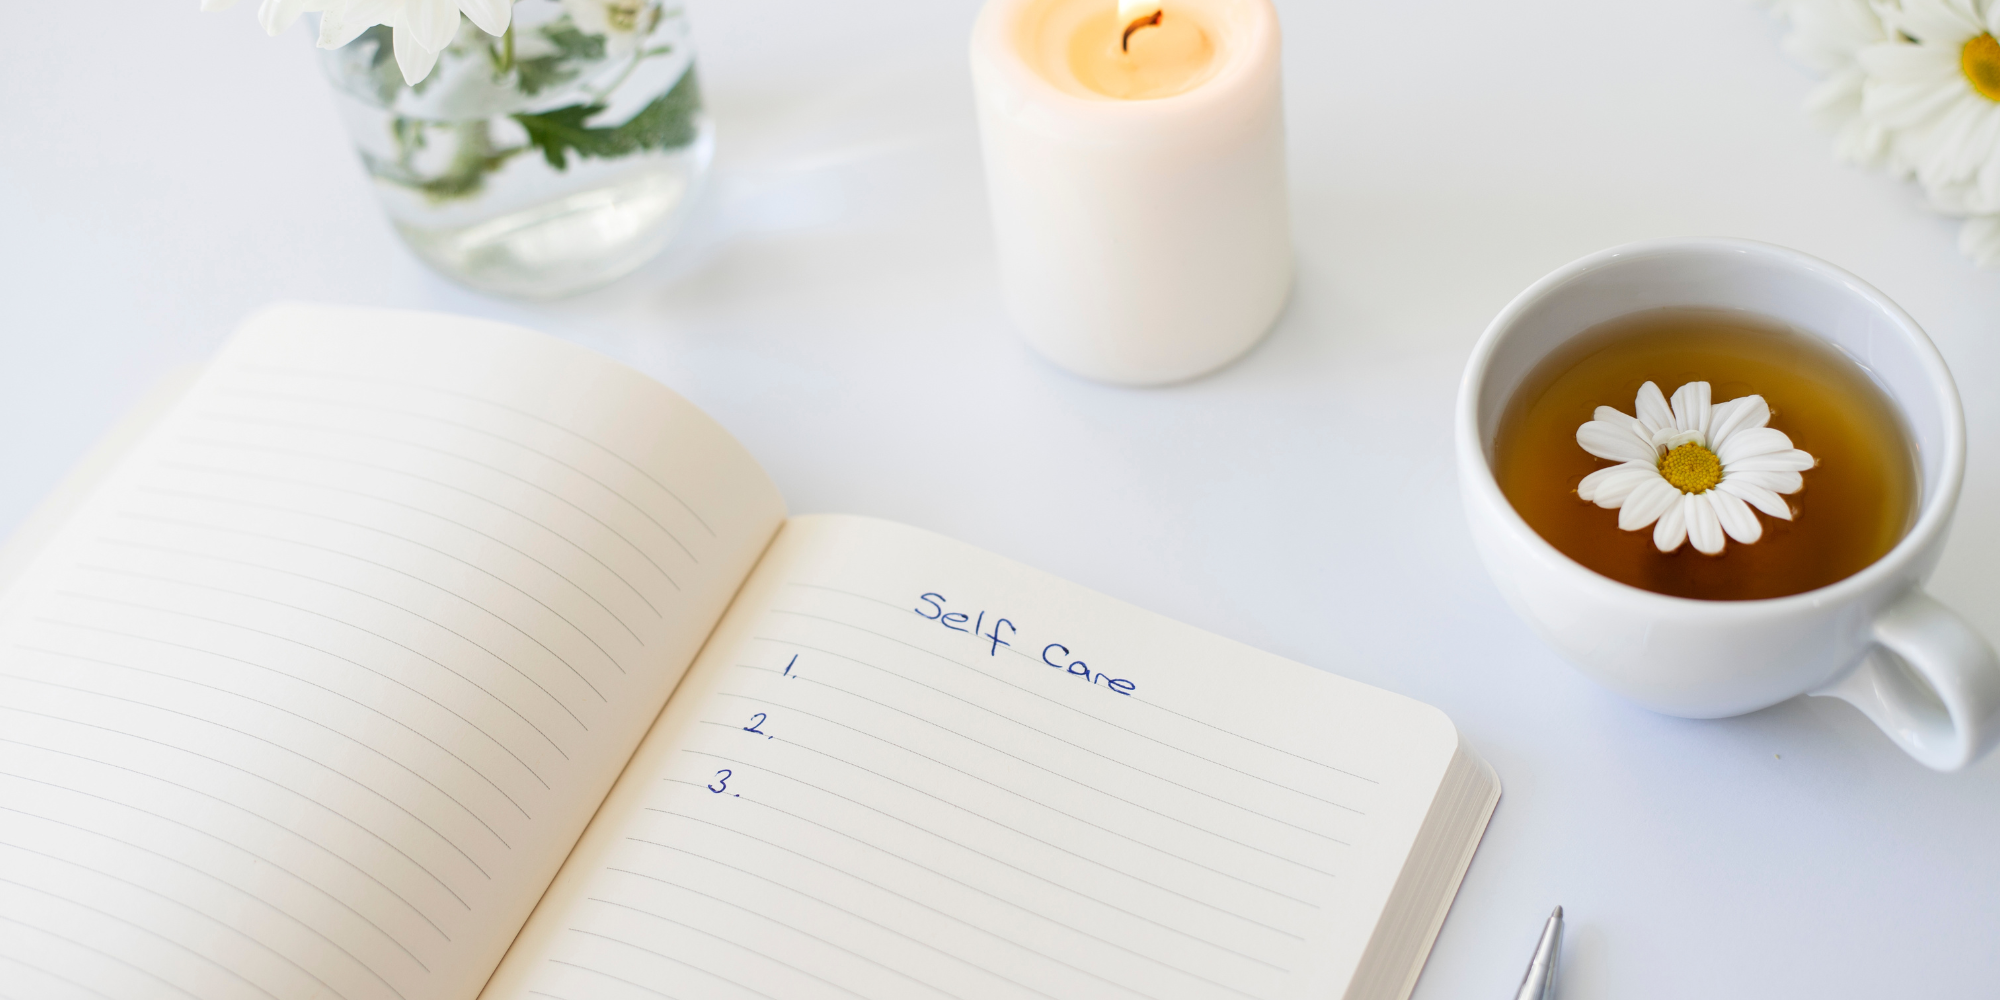 Journal open with the text "self care" at the top with numbered blanks below. There is a candle, a vase with flowers and cup of tea on the white table as well. 